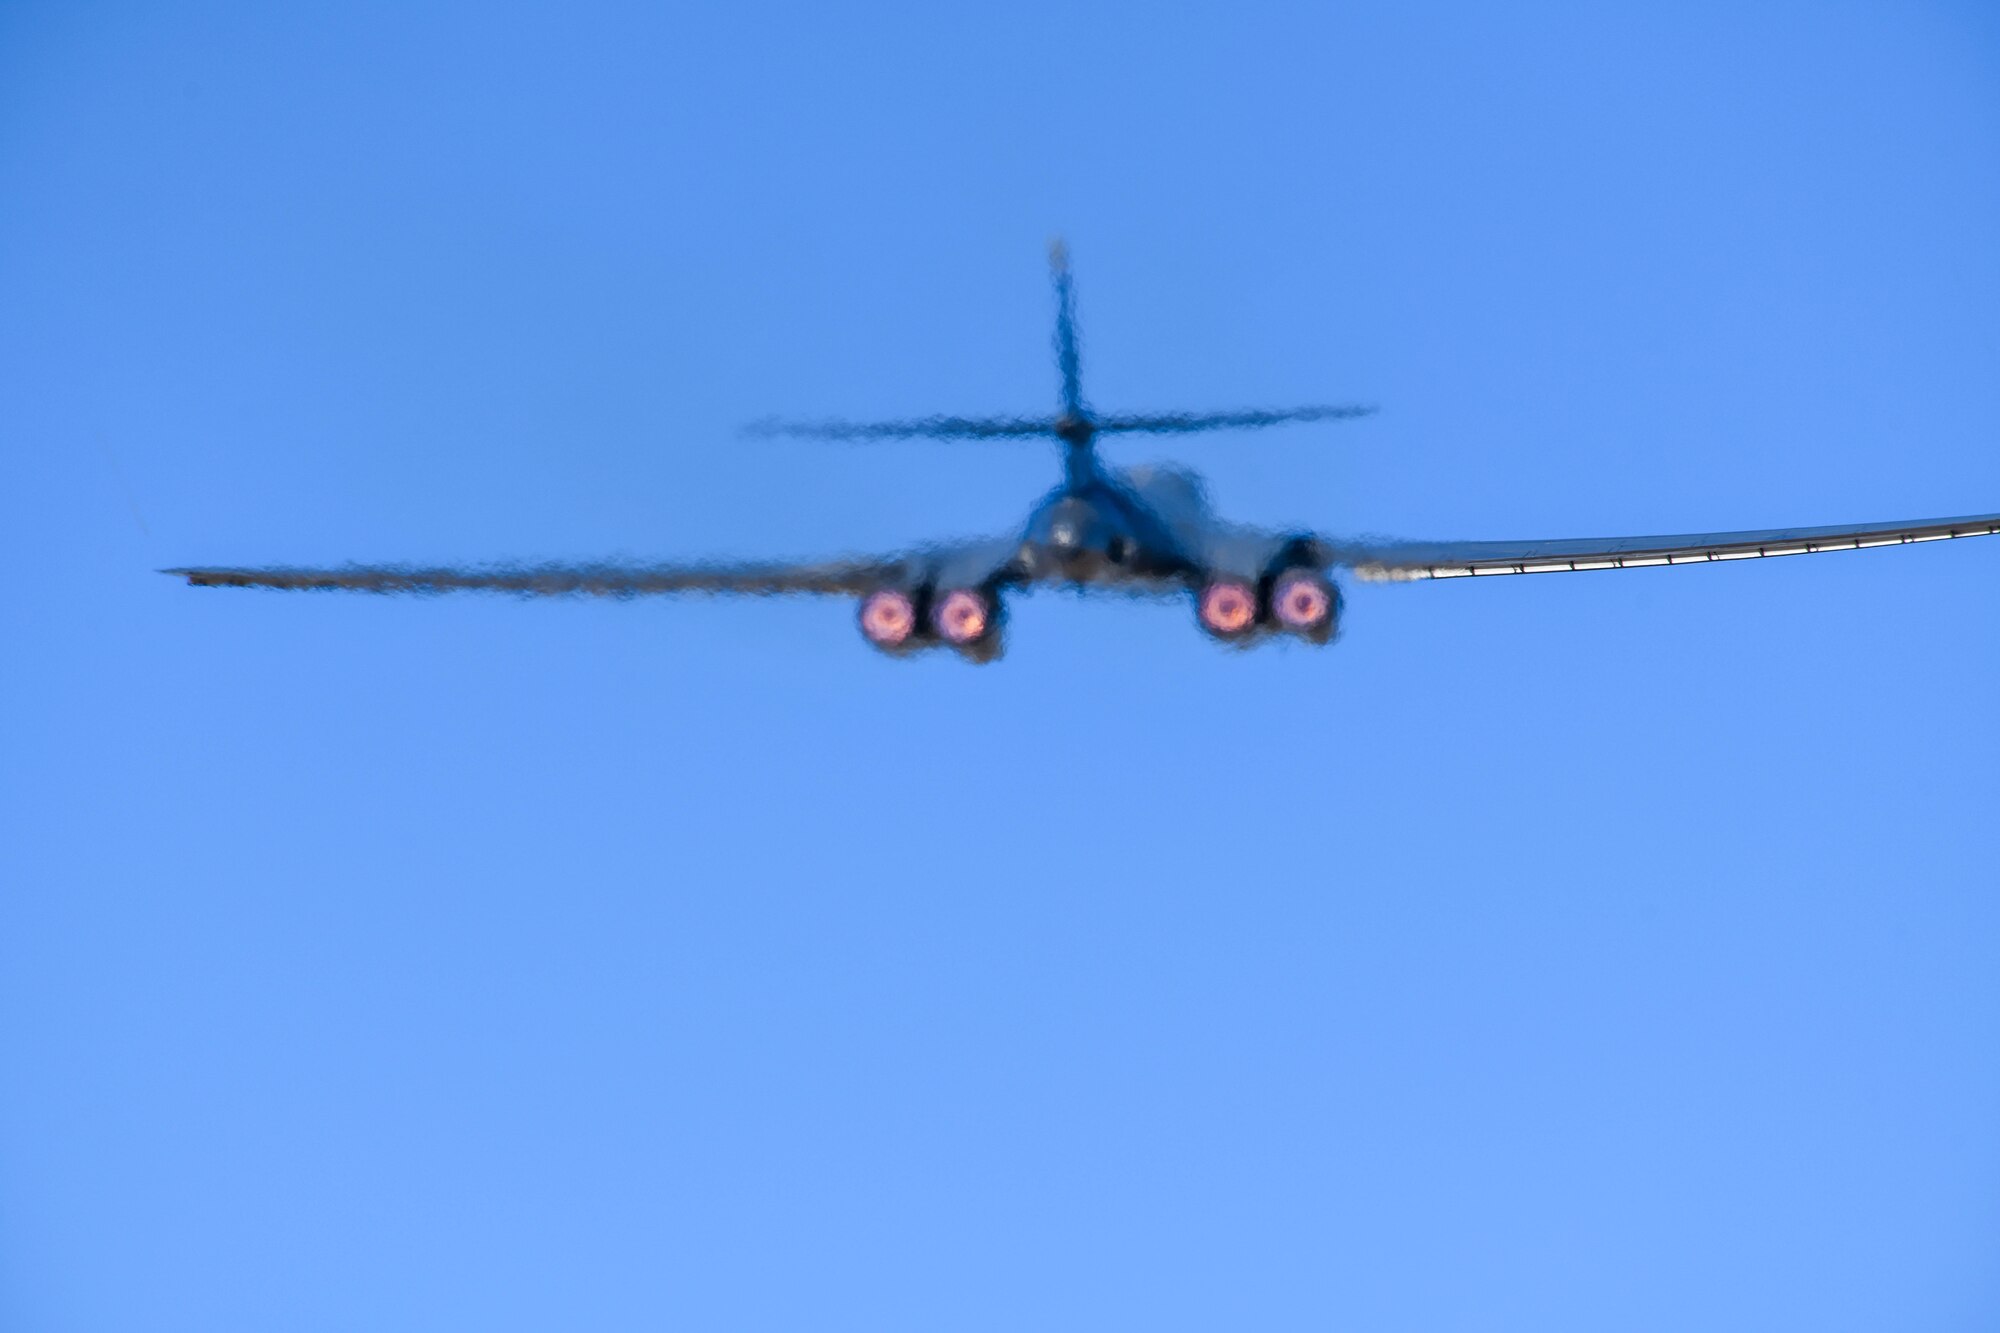 The afterburners of a B-1B Lancer glow as the bomber takes off from Ellsworth Air Force Base, S.D., Oct. 24, 2019. The deployment of this aircraft allows militaries from the United States and regional partner nations to train and work together to strengthen military-to-military relationships, promote regional security, improve combined tactical air operations and enhance interoperability of forces. The U.S. routinely and visibly demonstrates to our allies and partners through the global employment of our military forces. (U.S. Air Force photo by Staff Sgt. Hailey Staker)